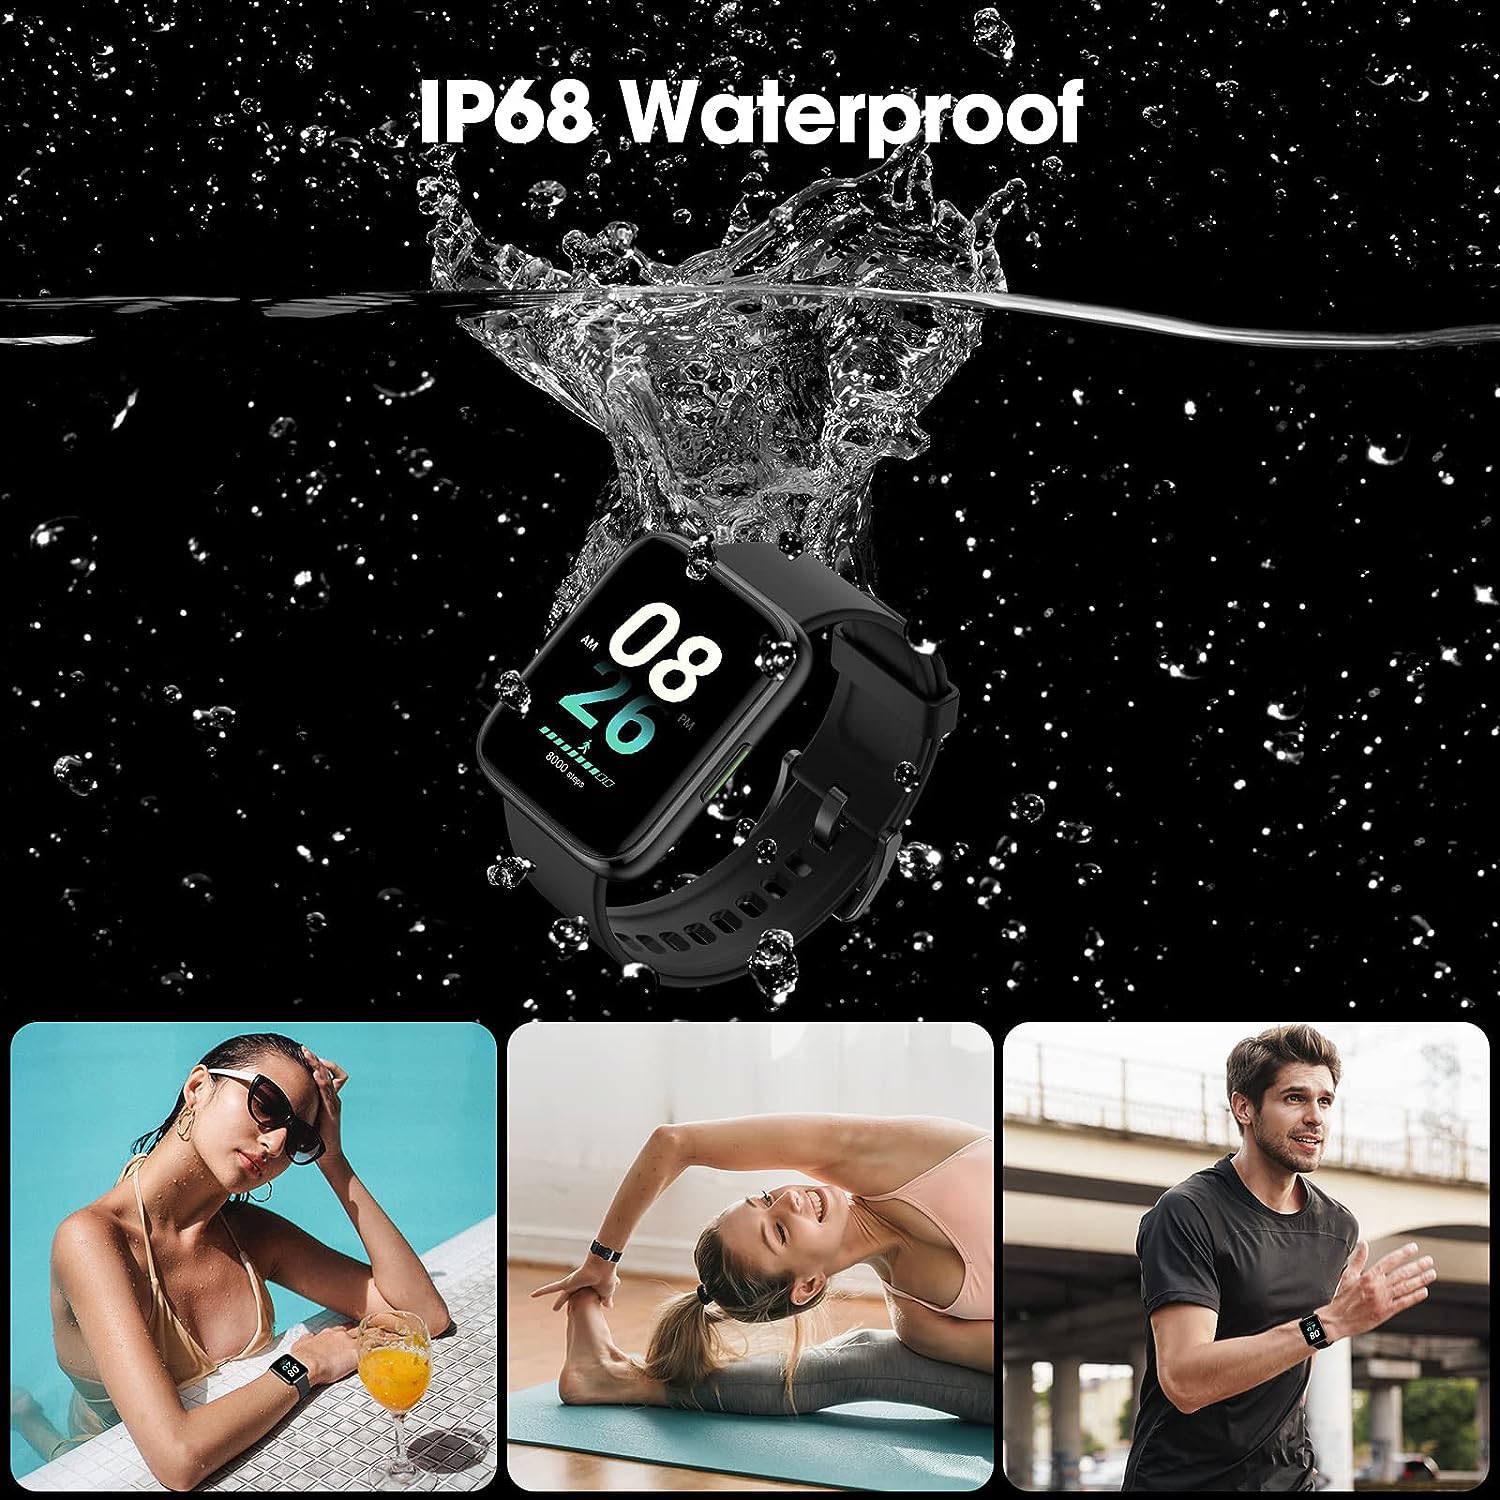 EURANS Smart Watch 44mm, AMOLED Always-on Display Fitness Watch with Heart Rate/Sleep Monitor Steps Calories Counter, IP68 Waterproof Activity Tracker Compatible with Android iOS